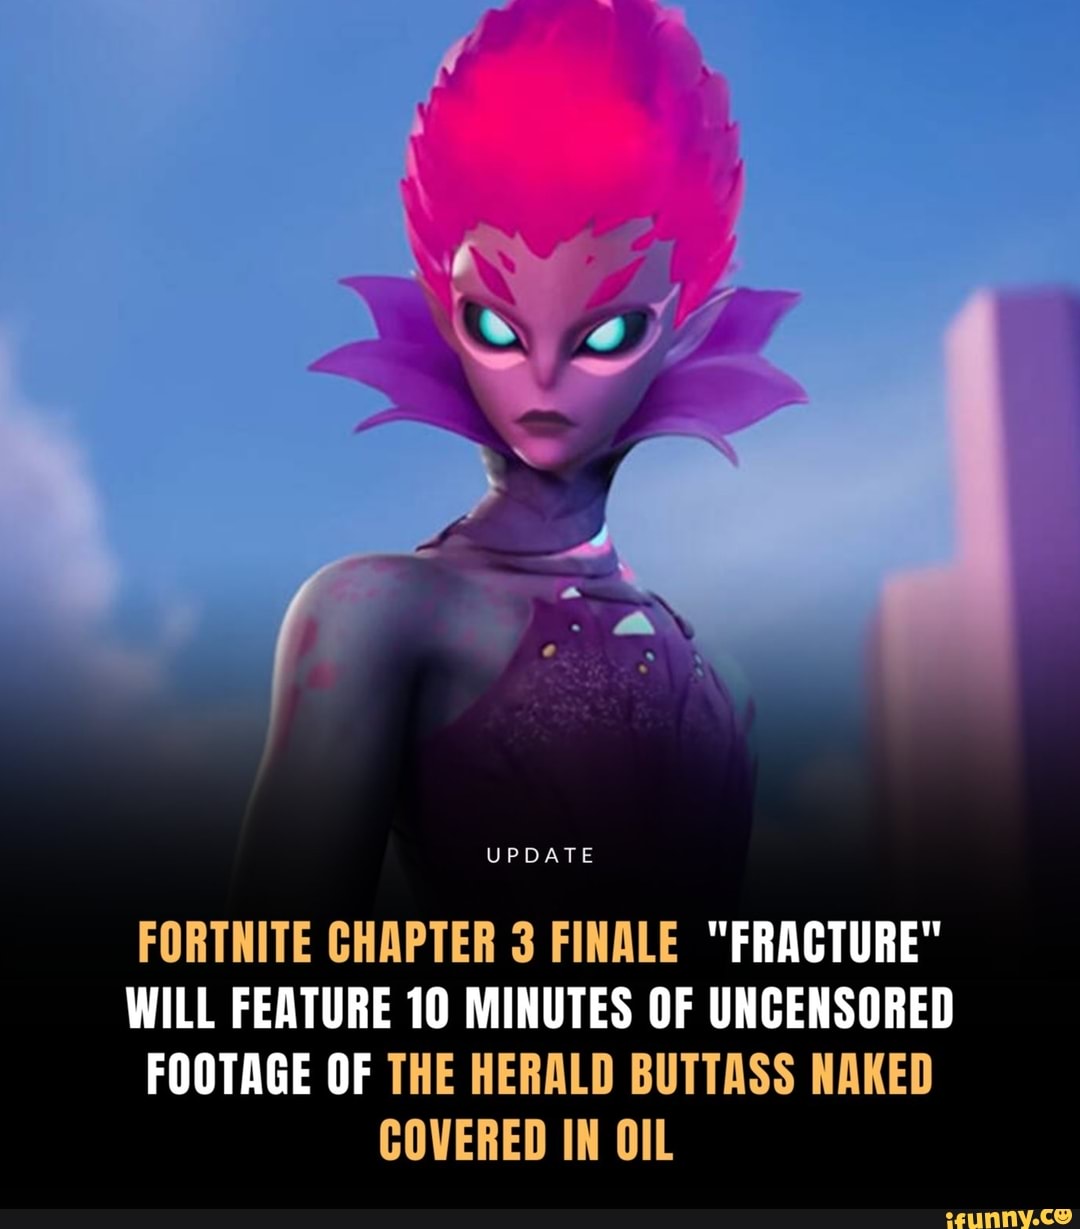 Update Fortnite Chapter 3 Finale Fracture Will Feature 10 Minutes Of Uncensored Footage Of The